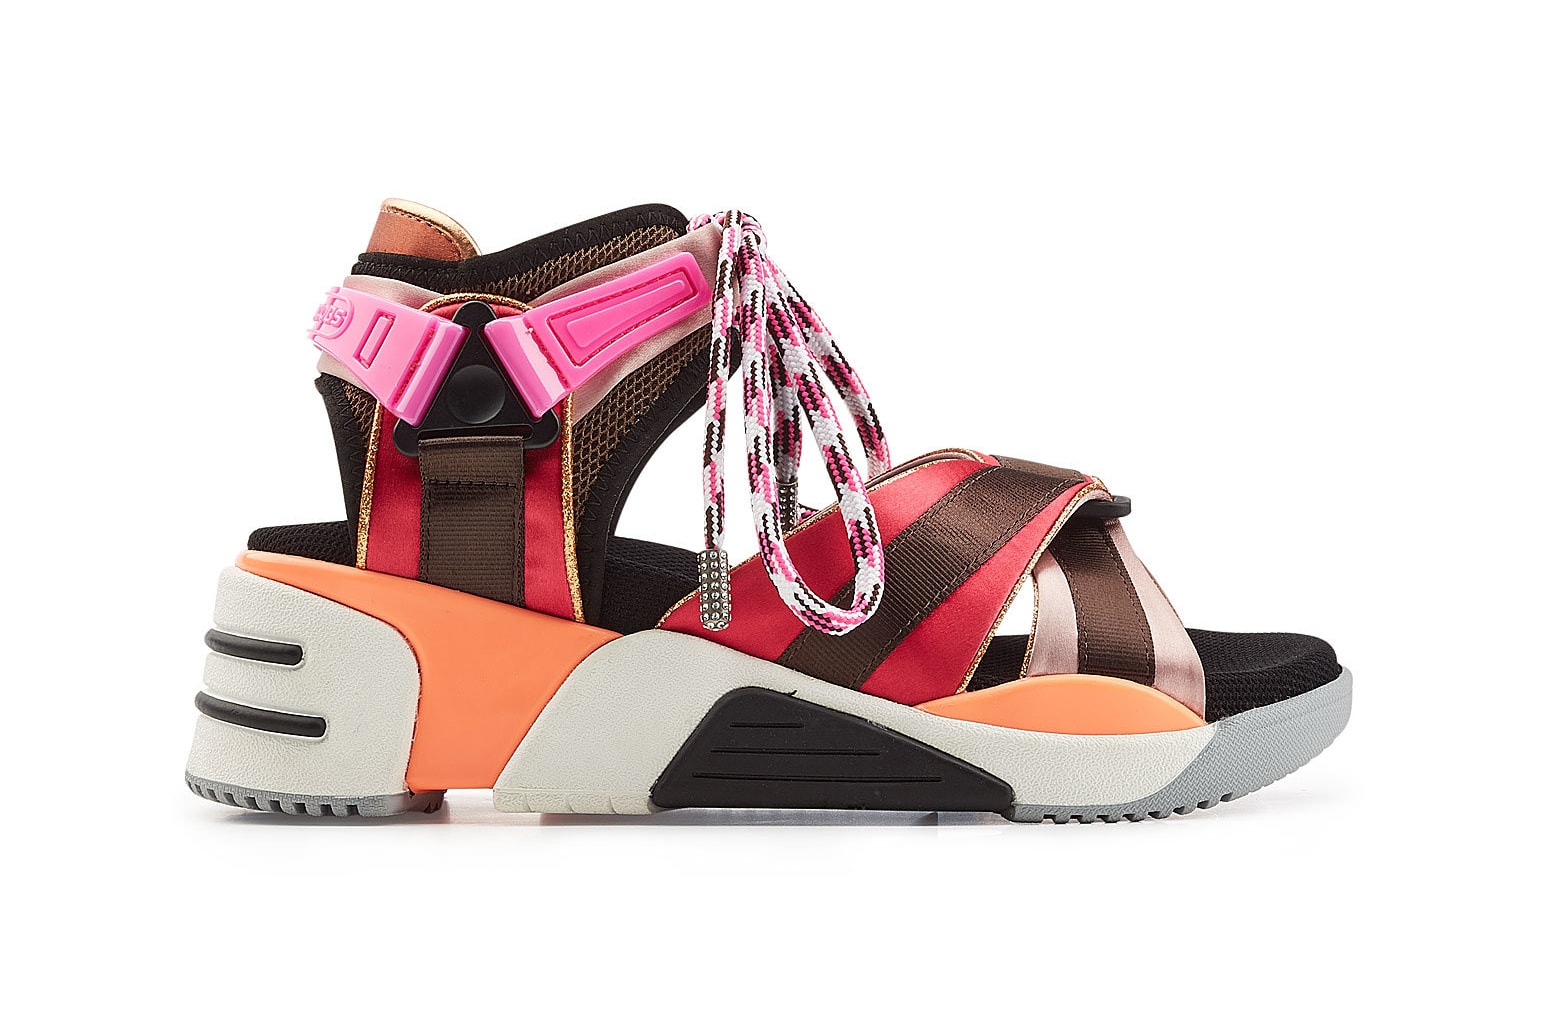 Marc Jacobs Somewhere Sport Sandals Multicolored